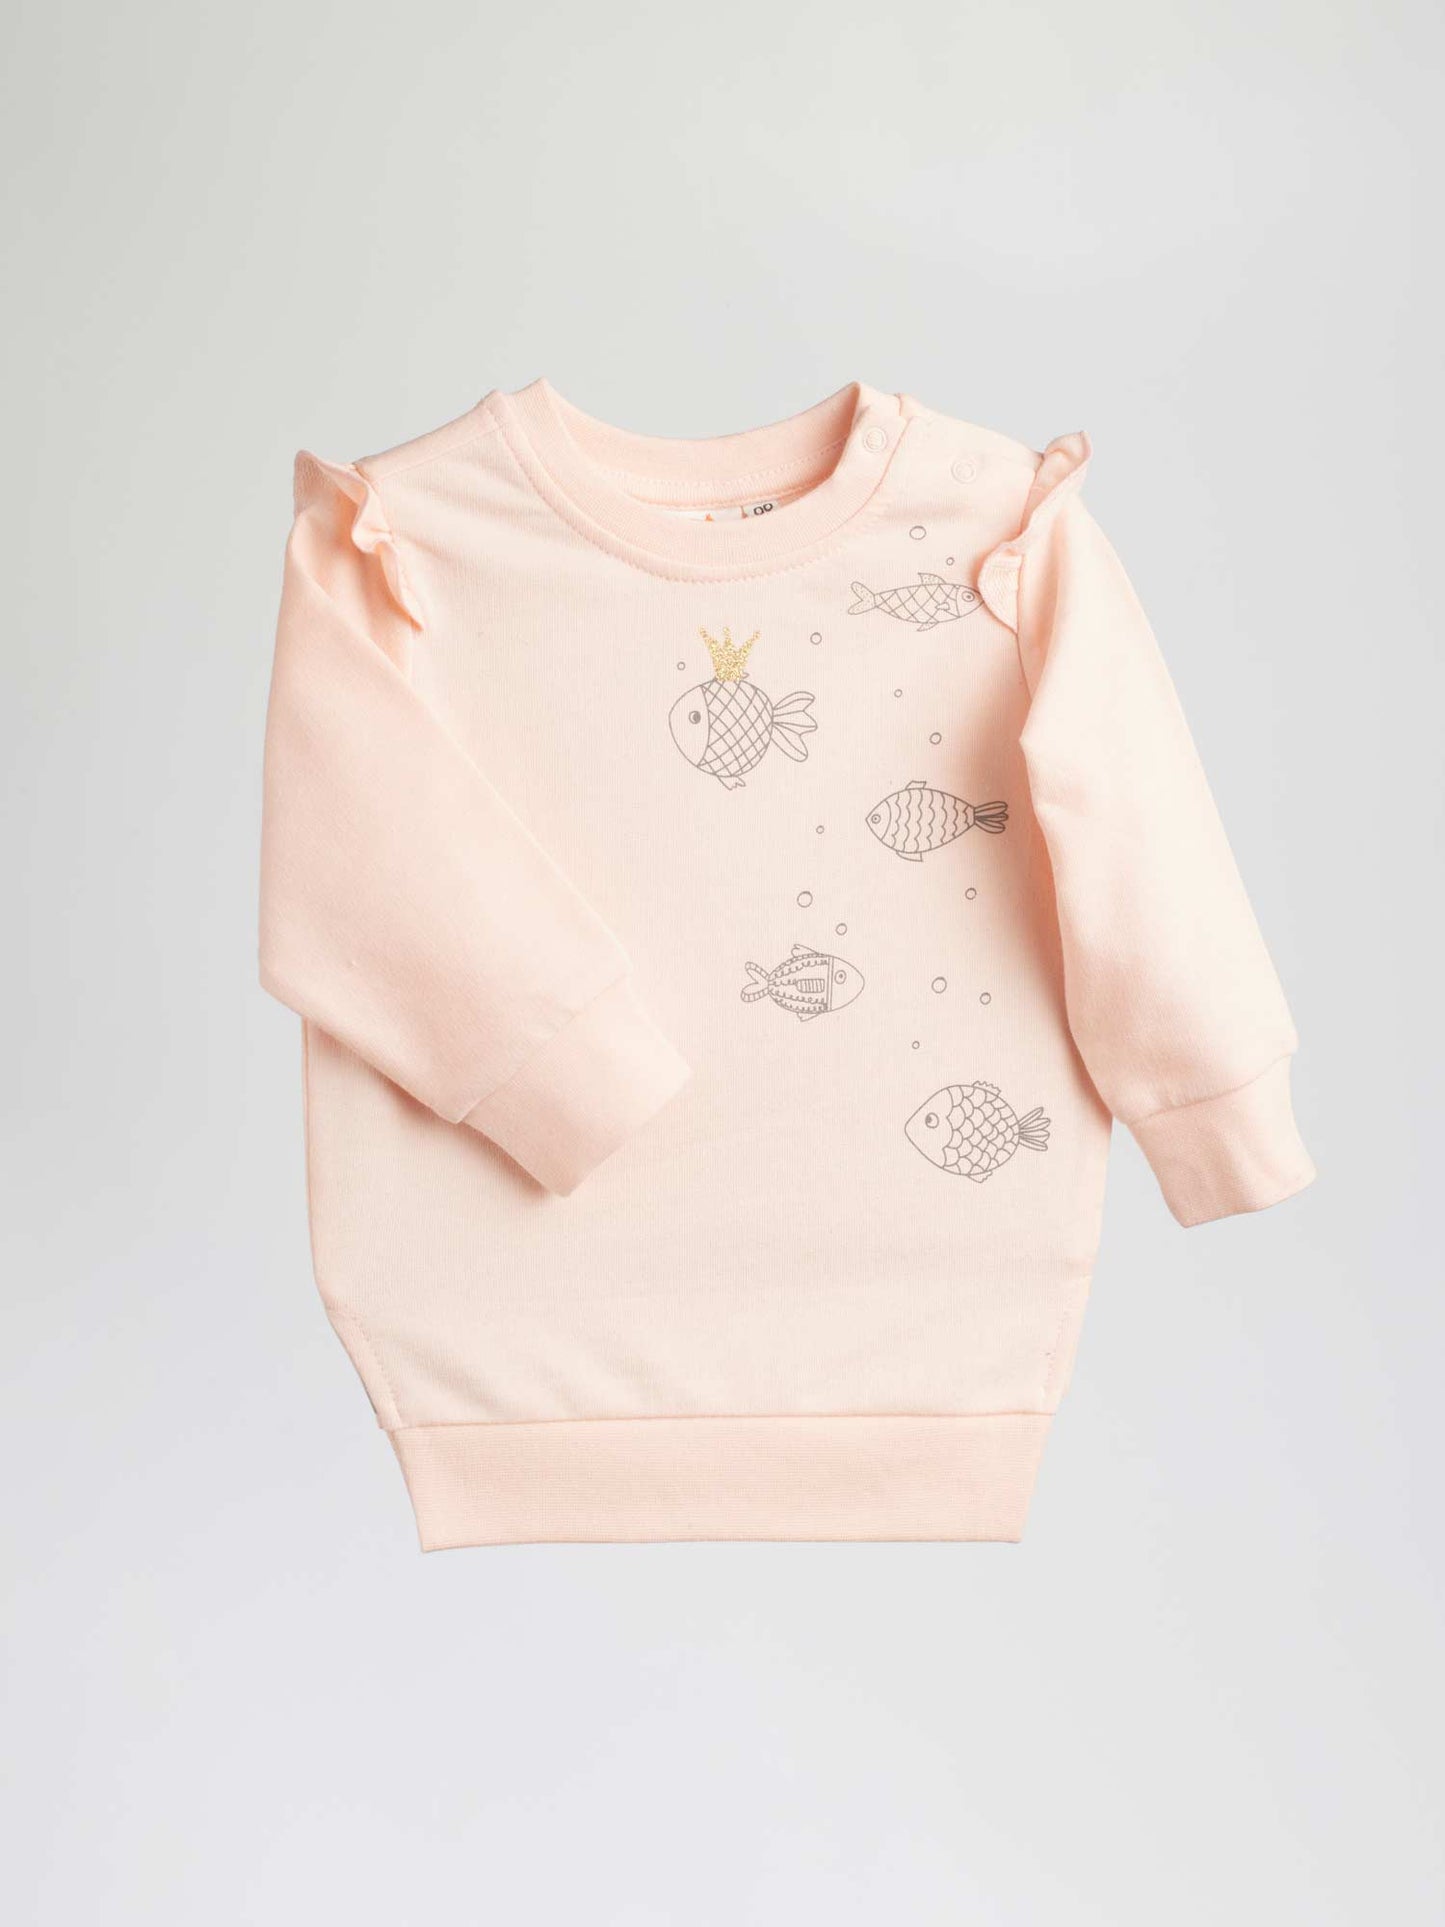 Baby Jumper Gold Fish 321 is a fun, playful jumper that is perfect for everyday wear. It features an adorable goldfish illustration and bright colors.